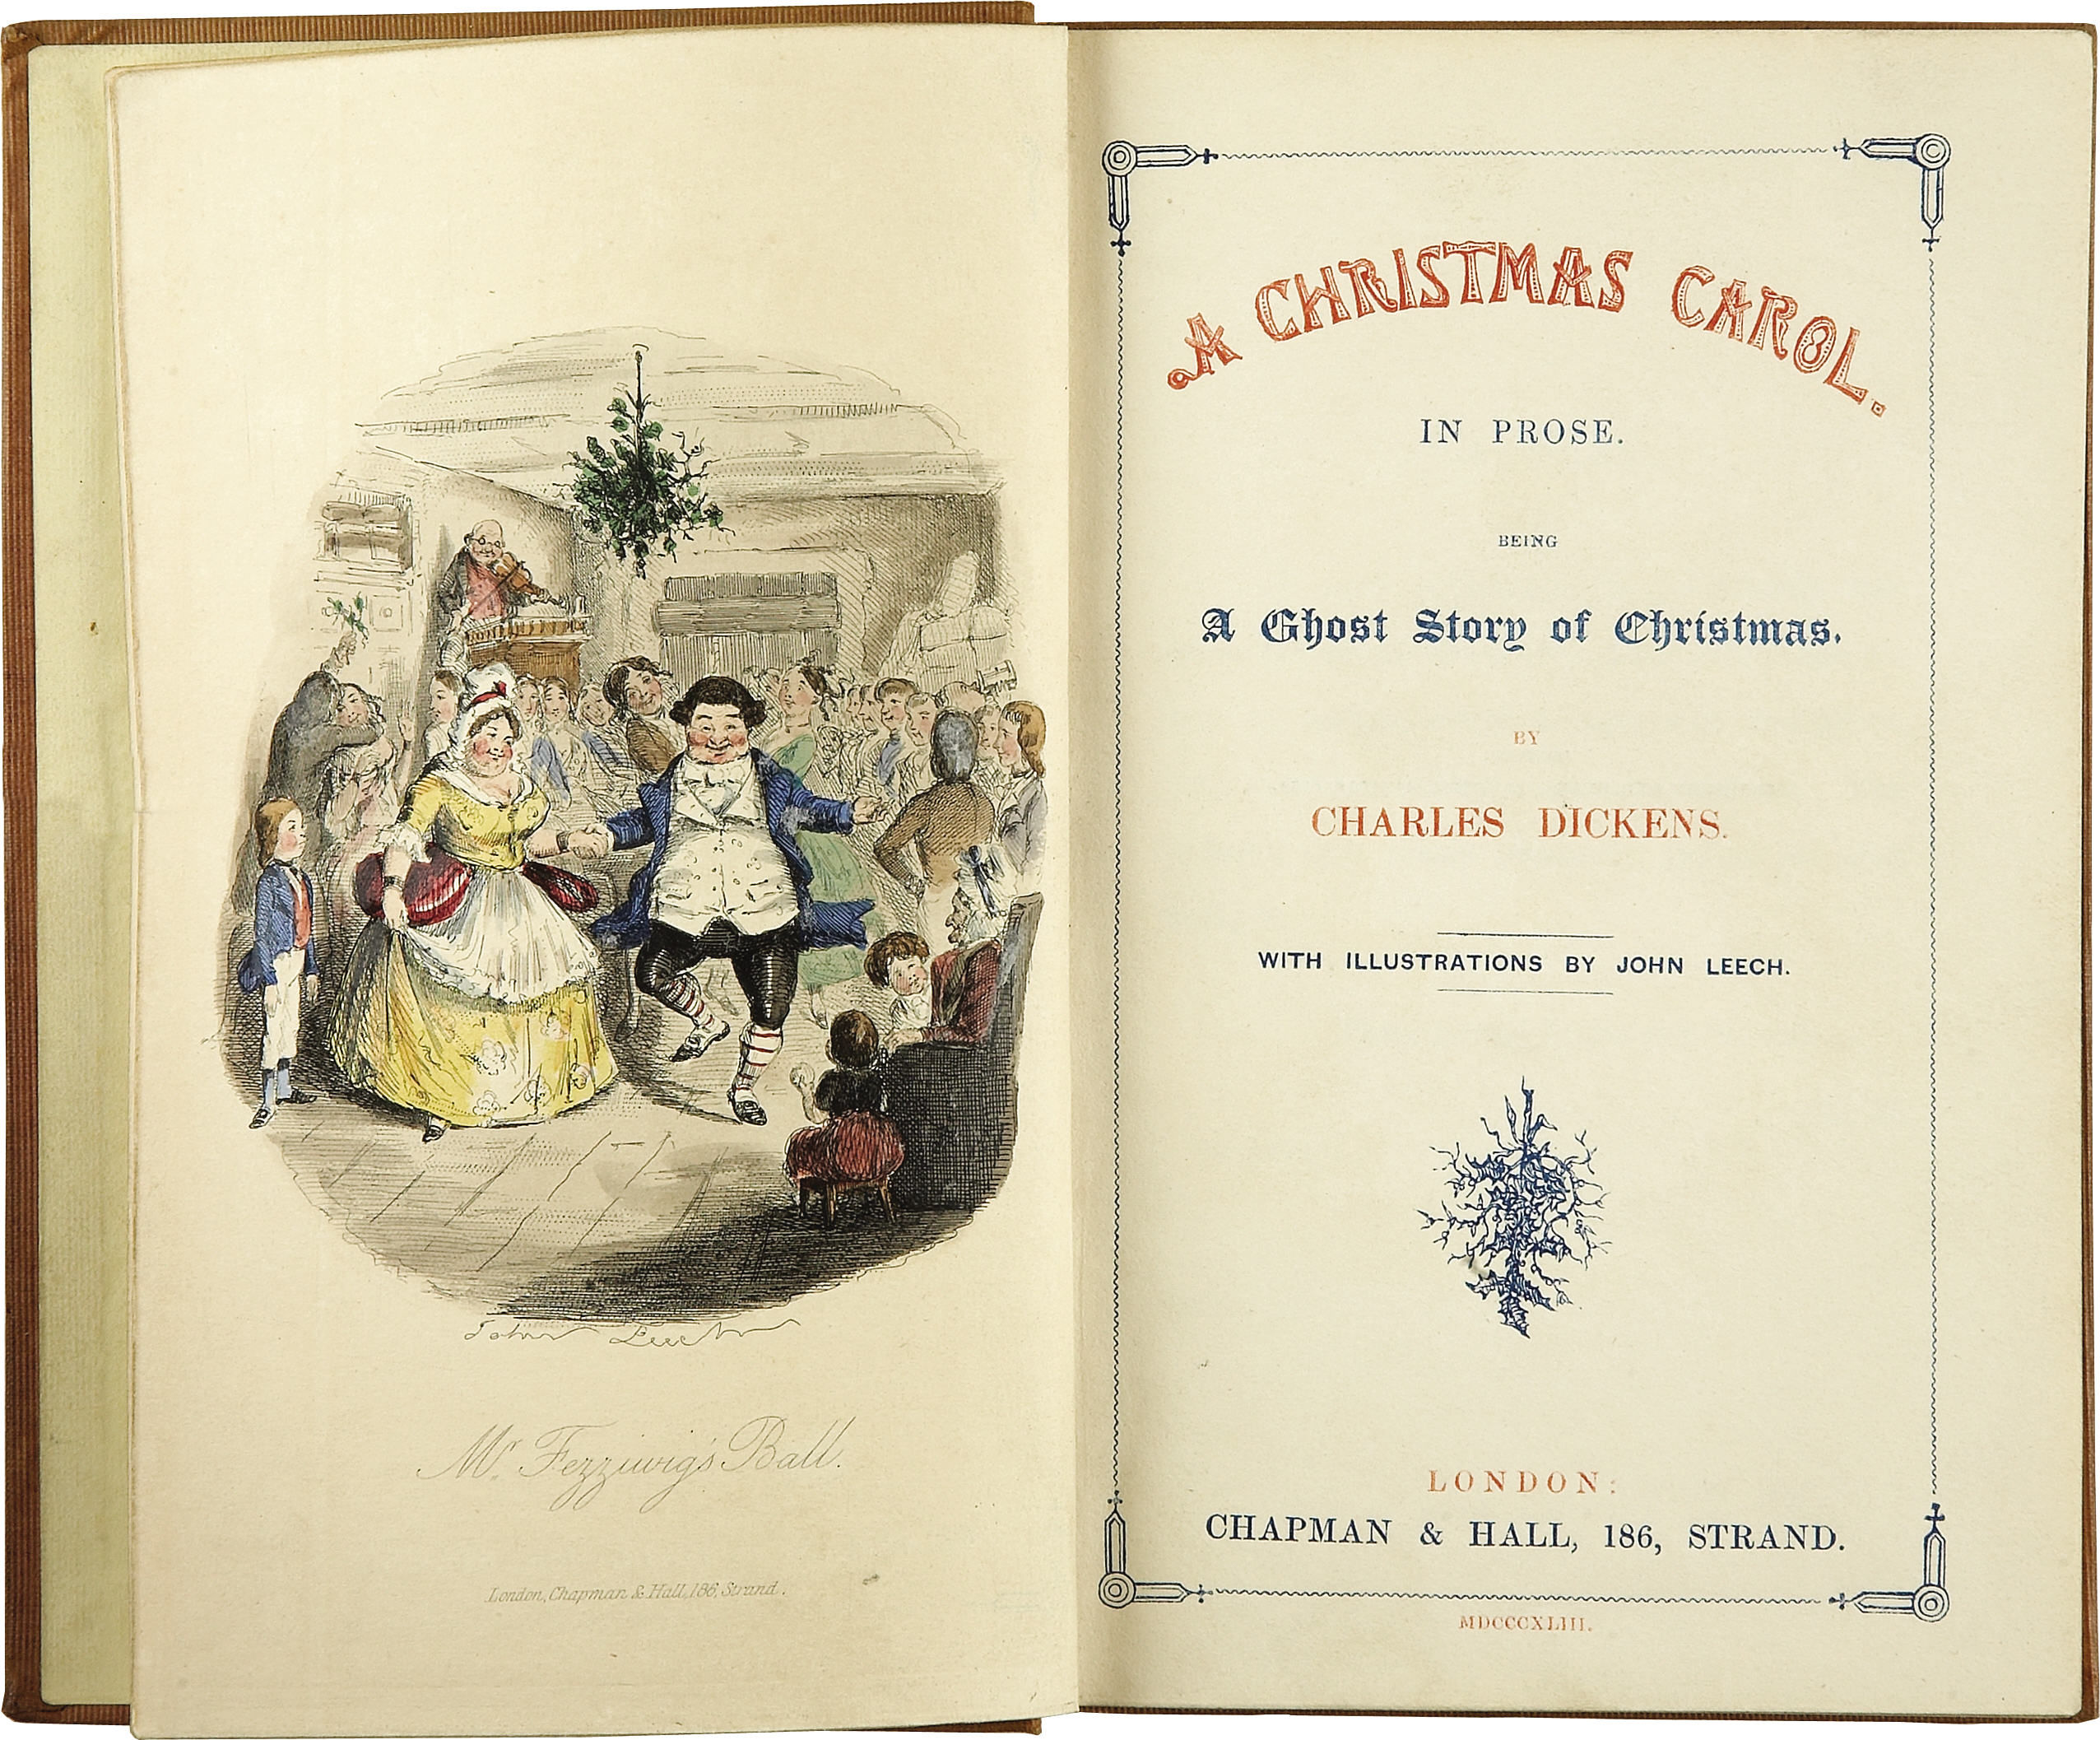 Interesting Factoids about Dickens’ “A Christmas Carol”